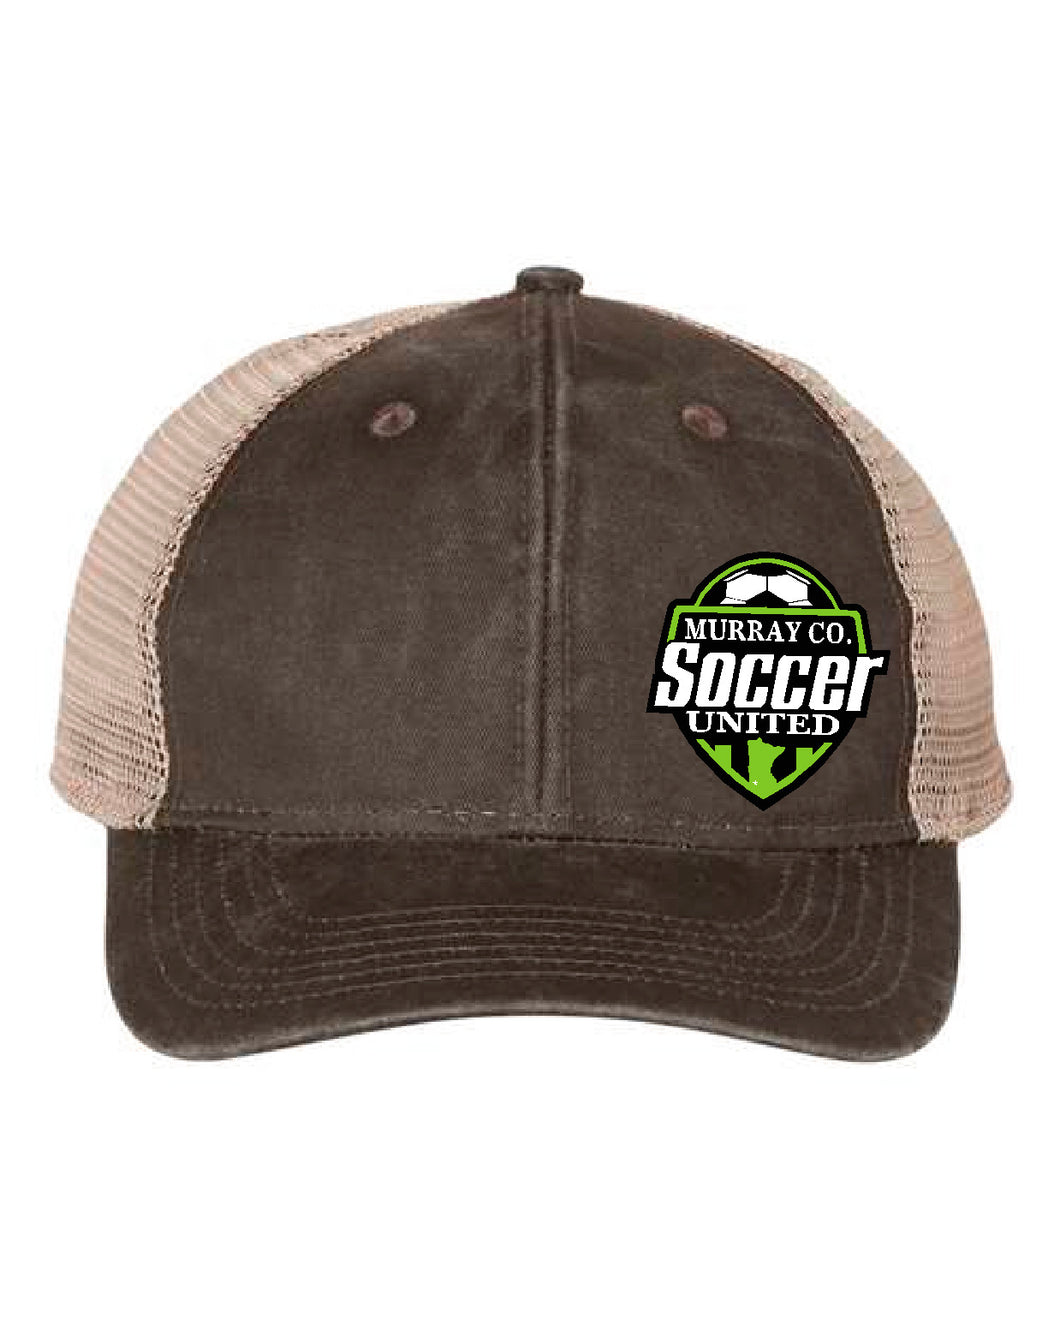 MURRAY COUNTY SOCCER UNITED PONYTAIL CAP